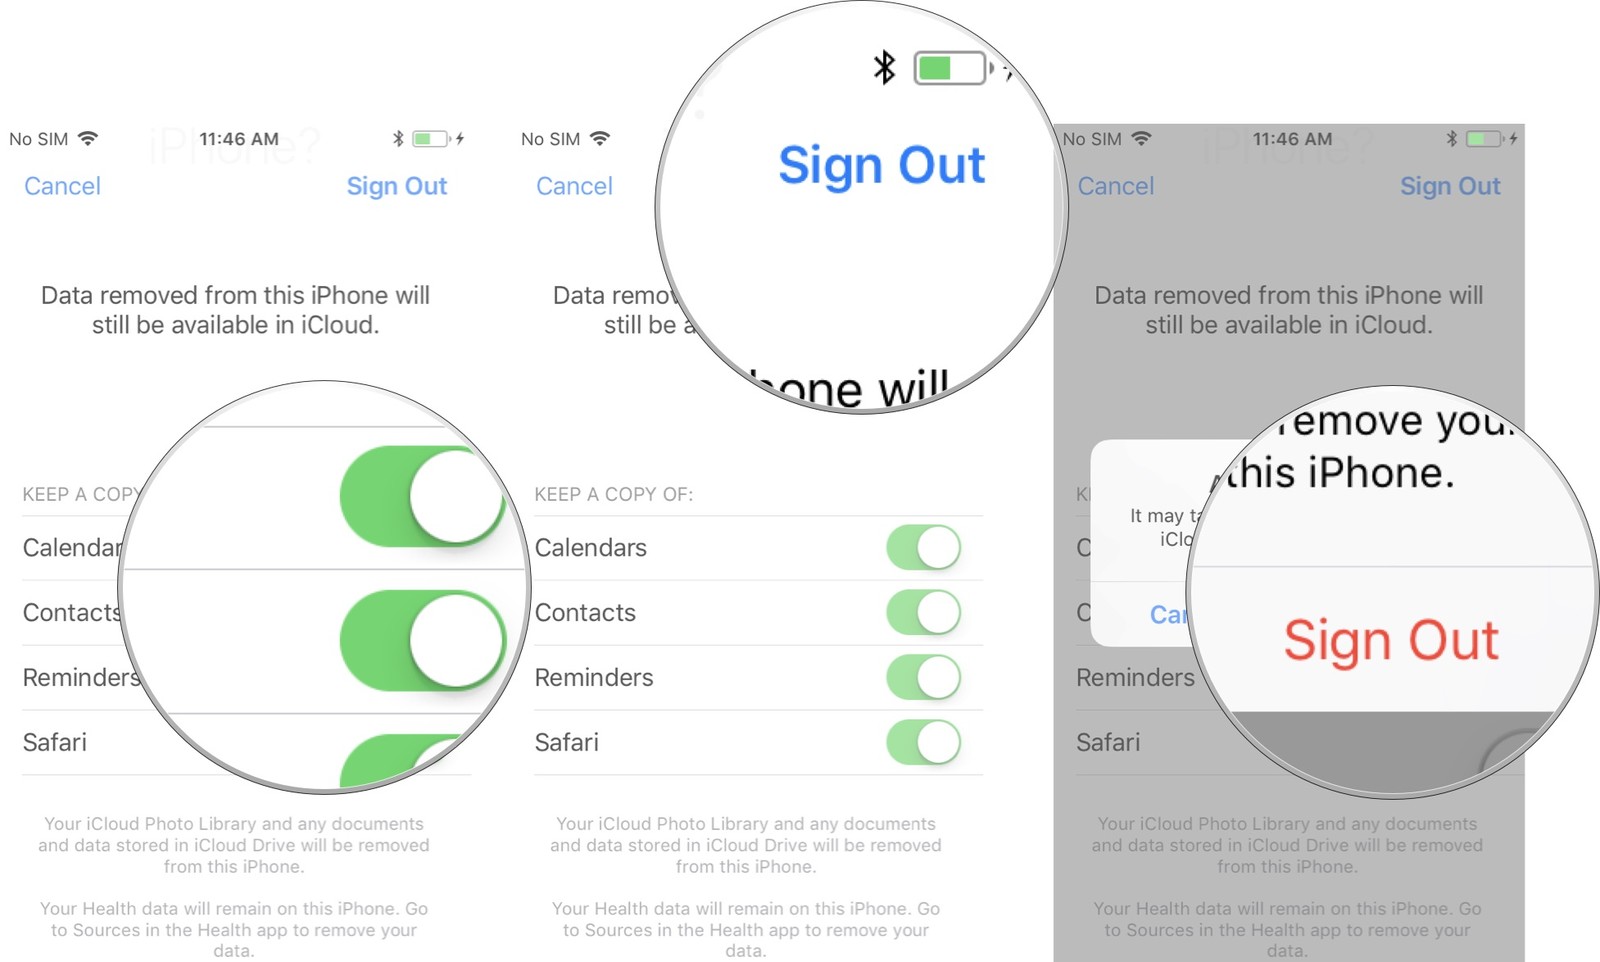 Sign Out Your Apple ID